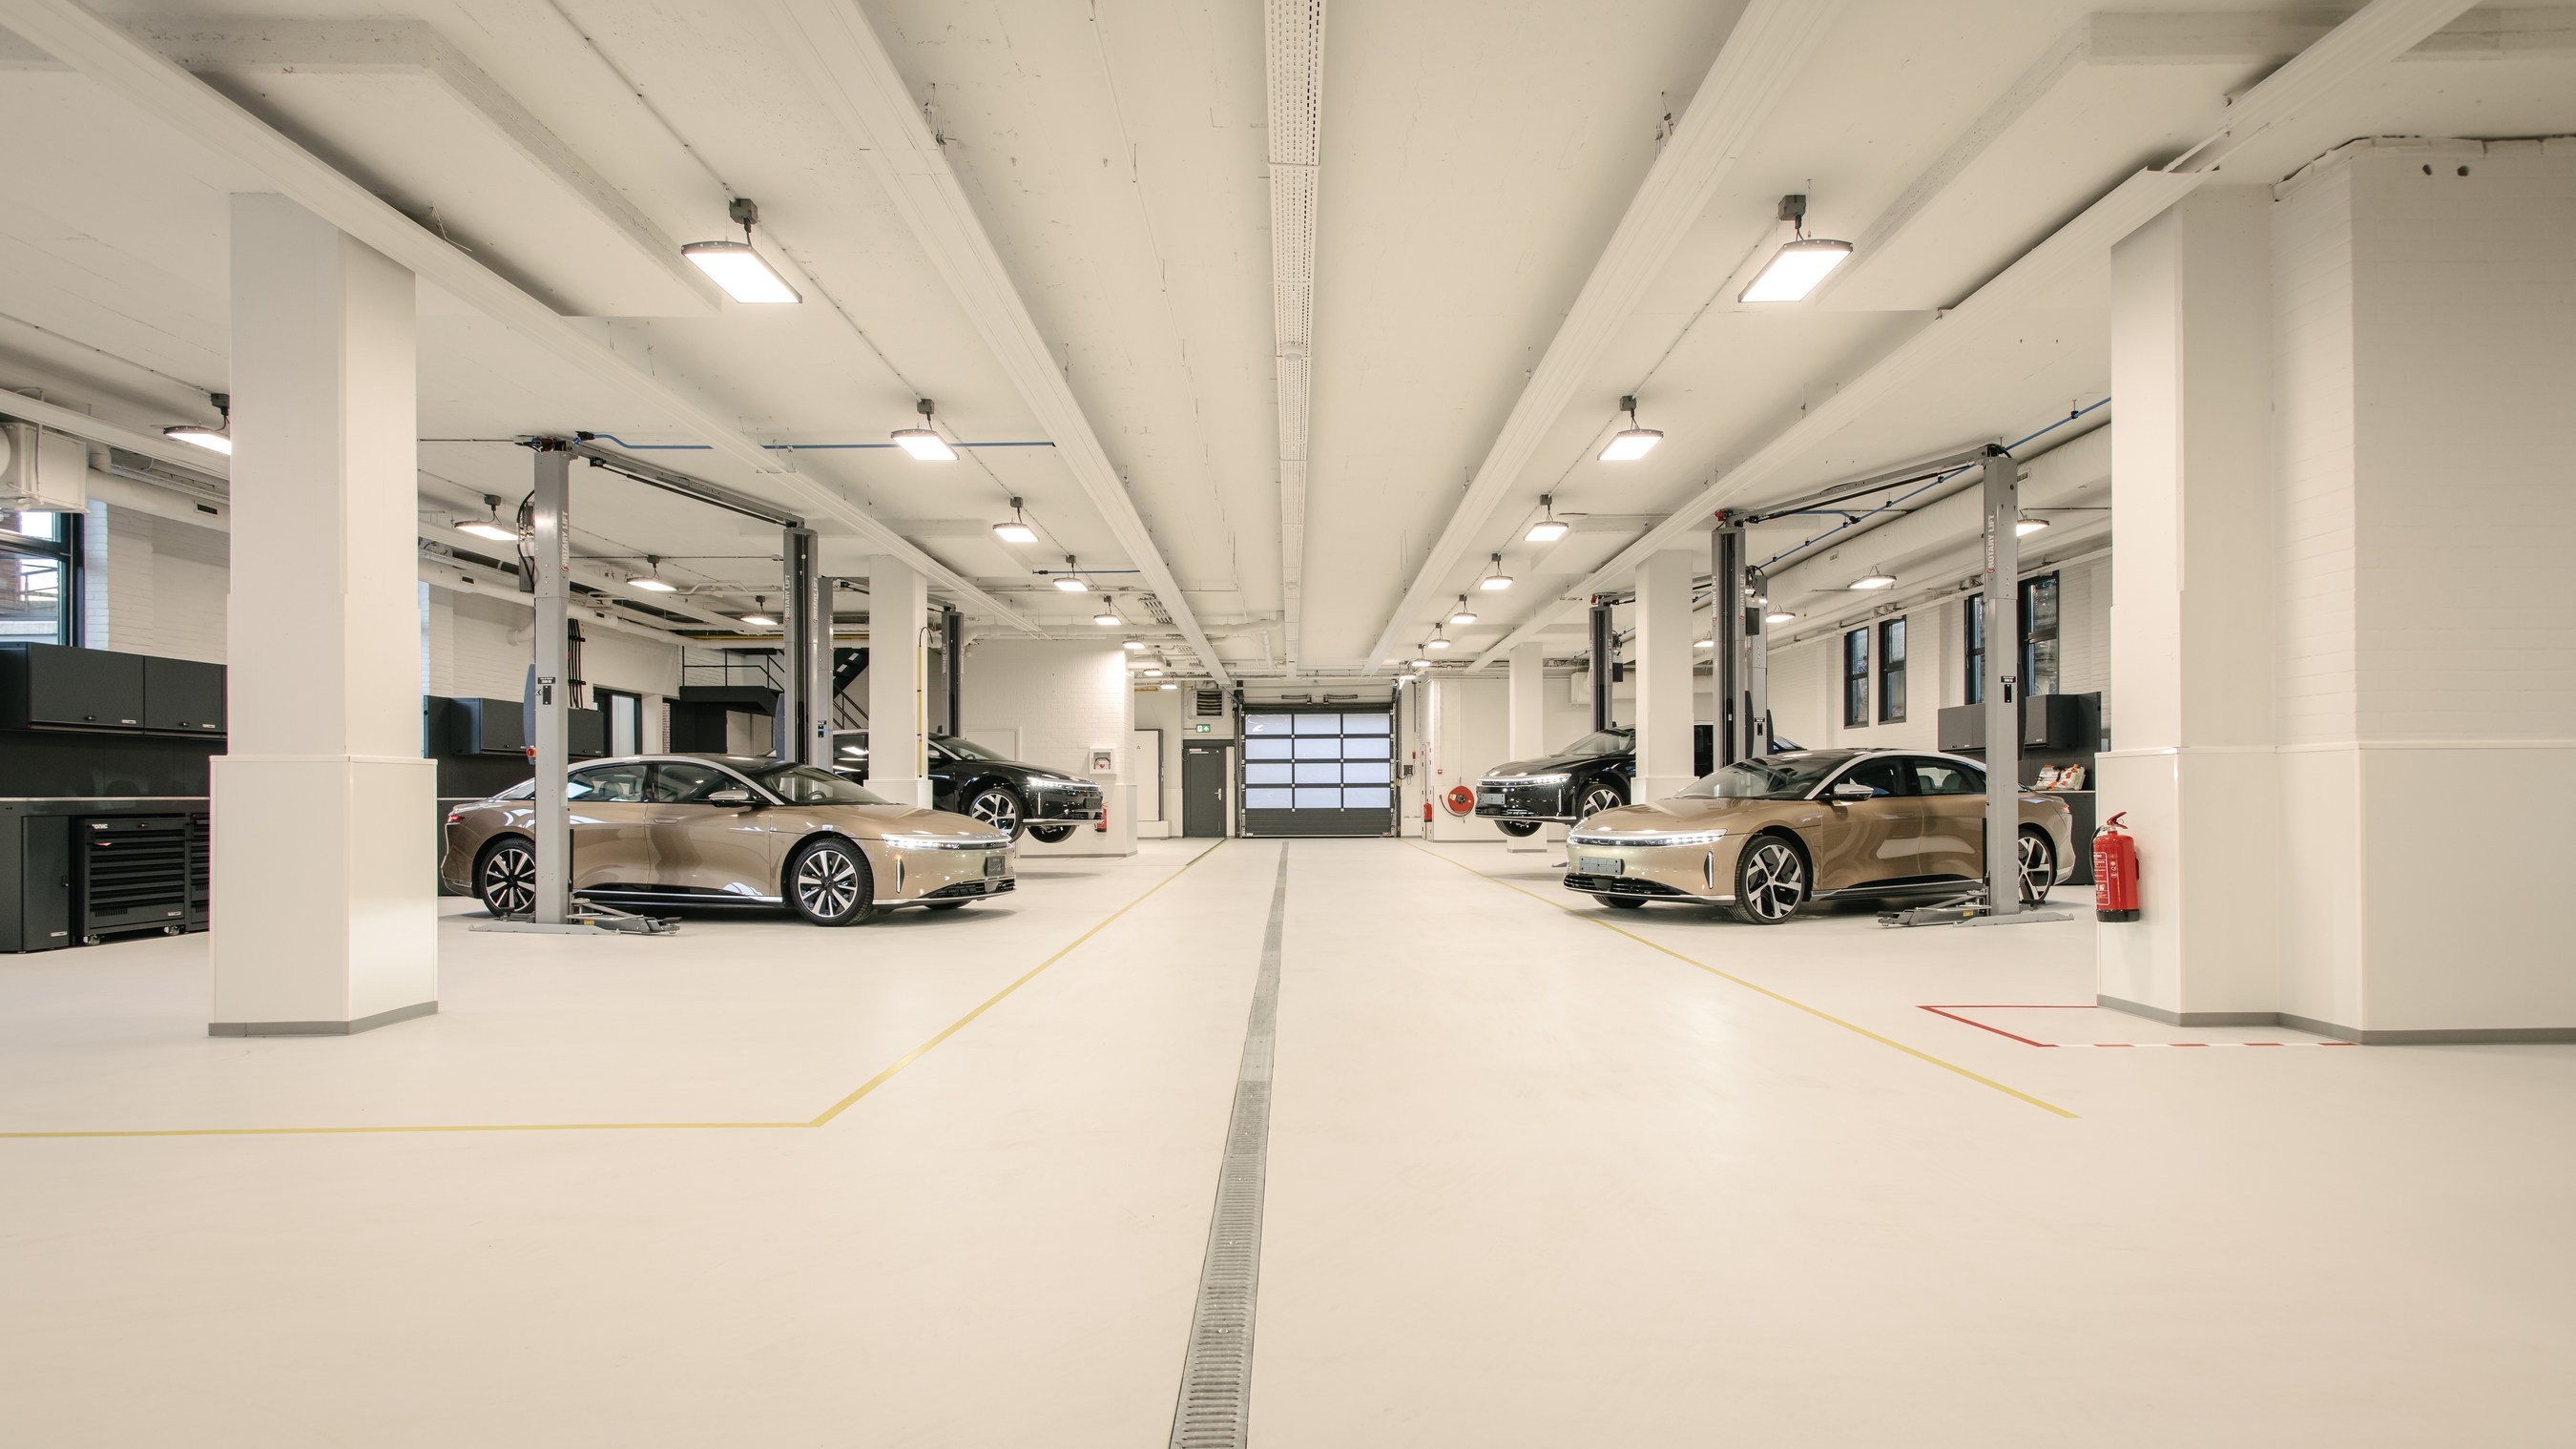 The opening of Lucid Motors third retail location in Europe comes a week after the company won a full five star rating for its Lucid Air